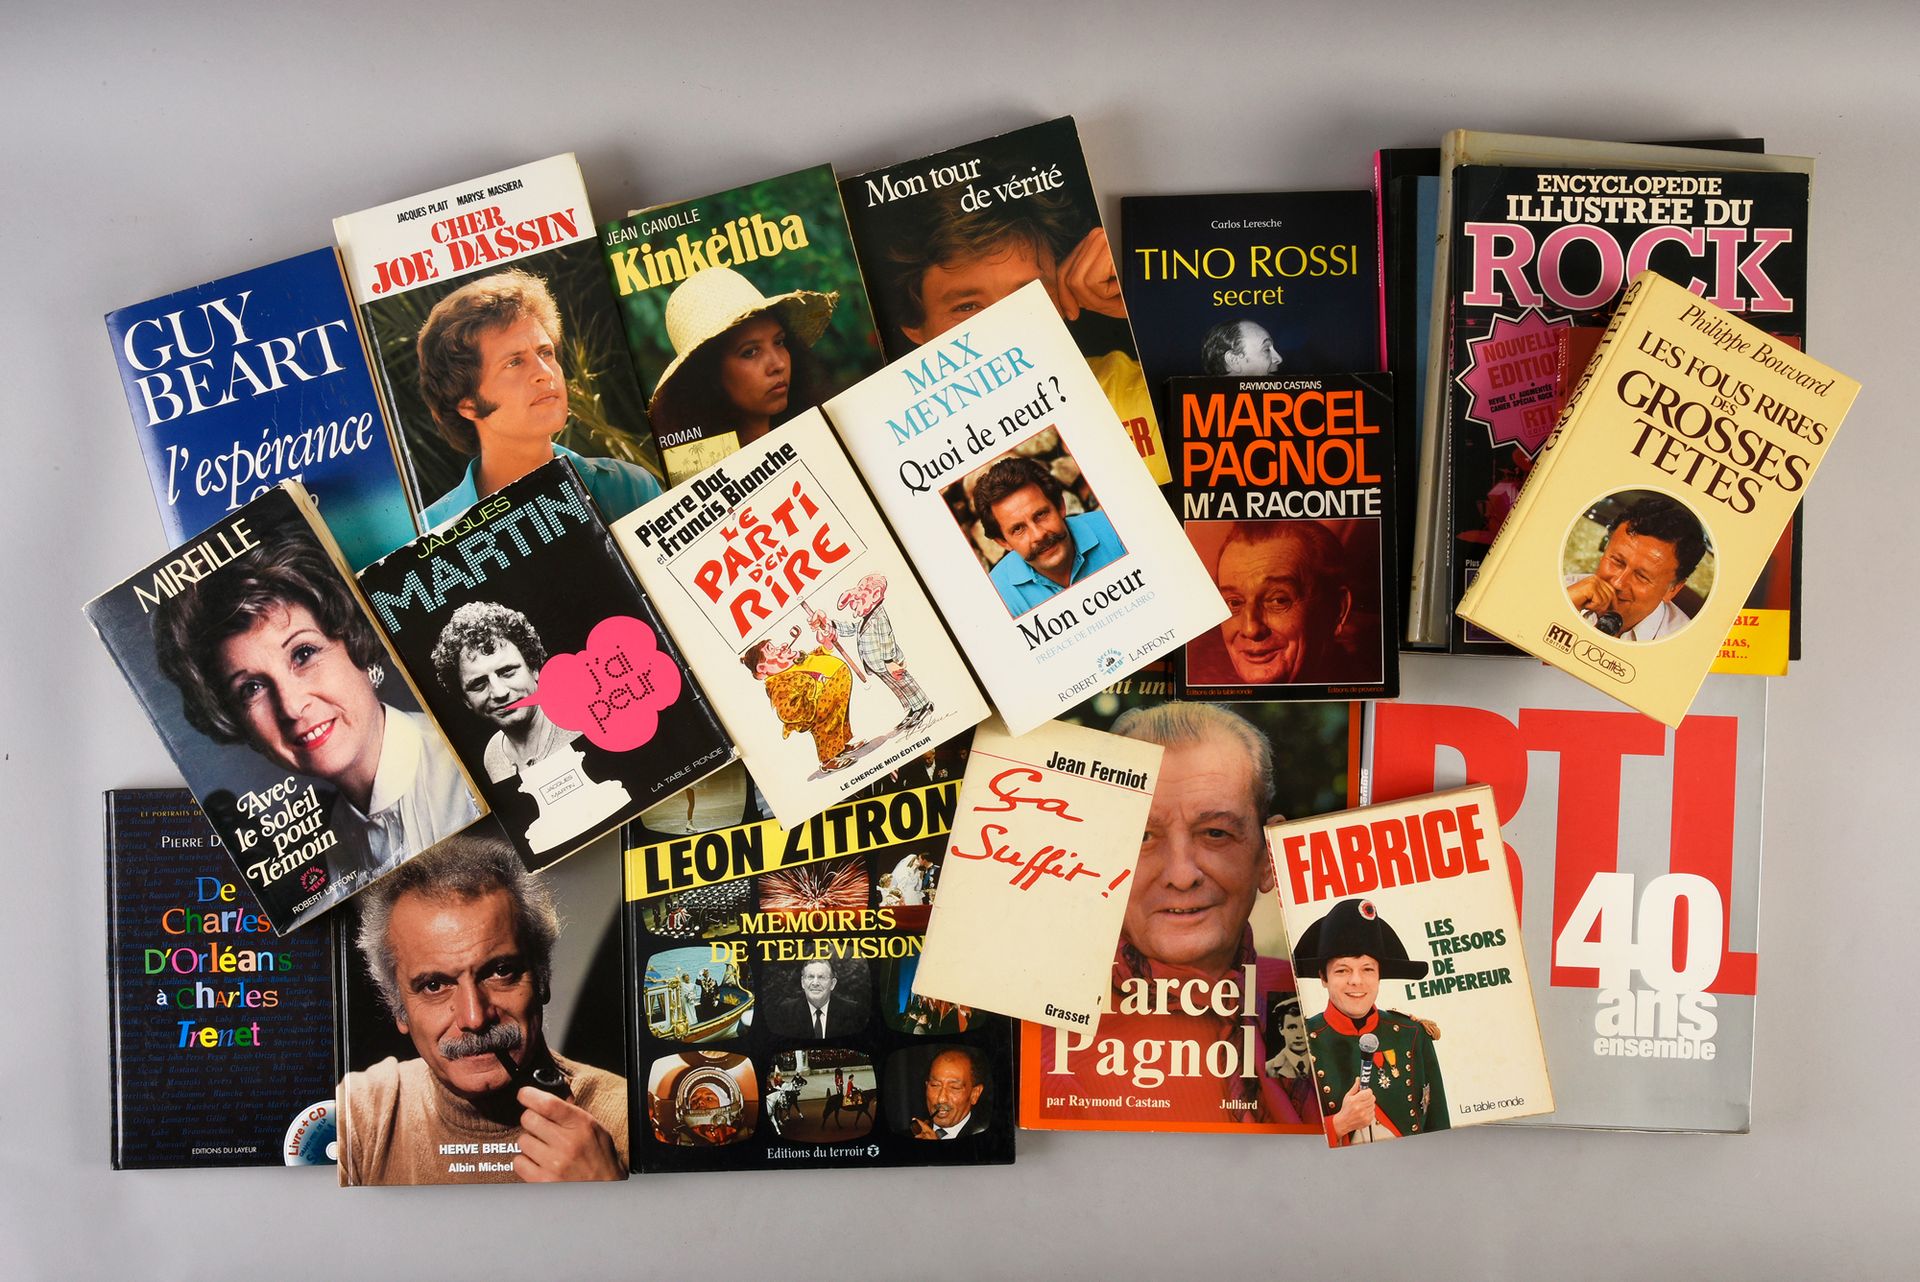 Null RTL: 1 set of books dedicated to the RTL director of antenna, Roger Kreiche&hellip;